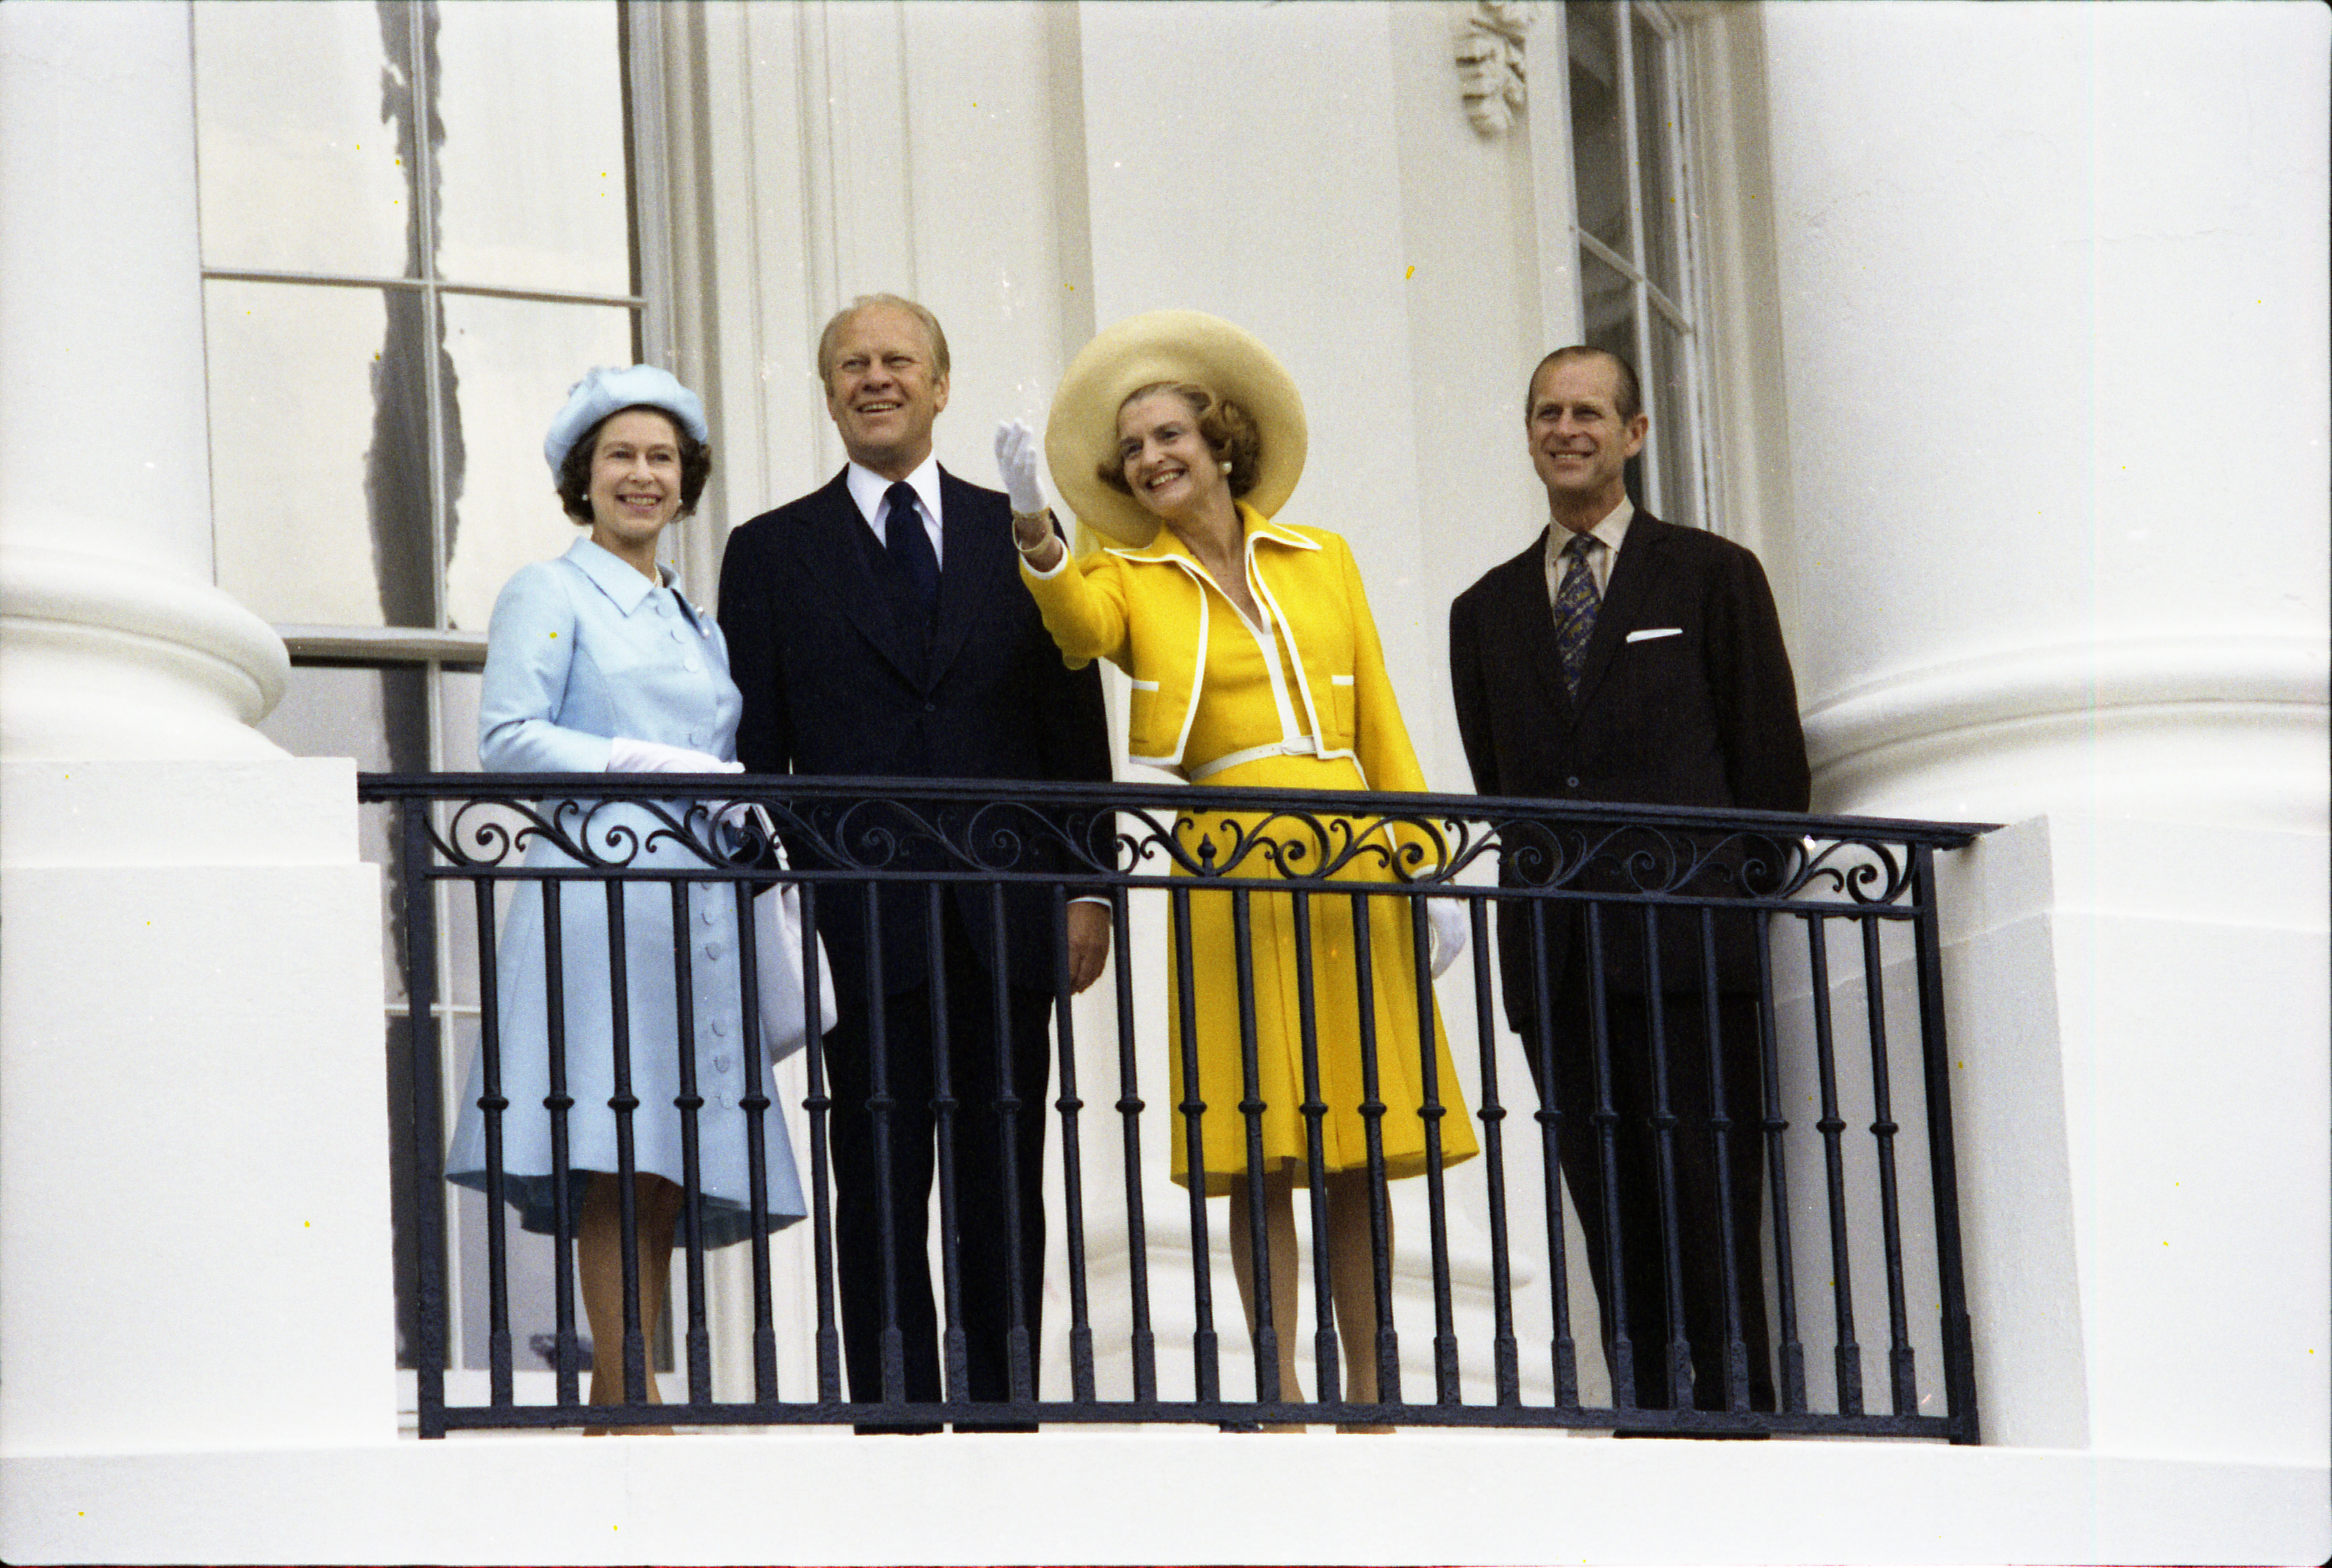 President and Mrs. Ford and Her Majesty Queen Elizabeth II and Prince Philip on the Truman Balcony following the Queen's state arrival at the White House.  